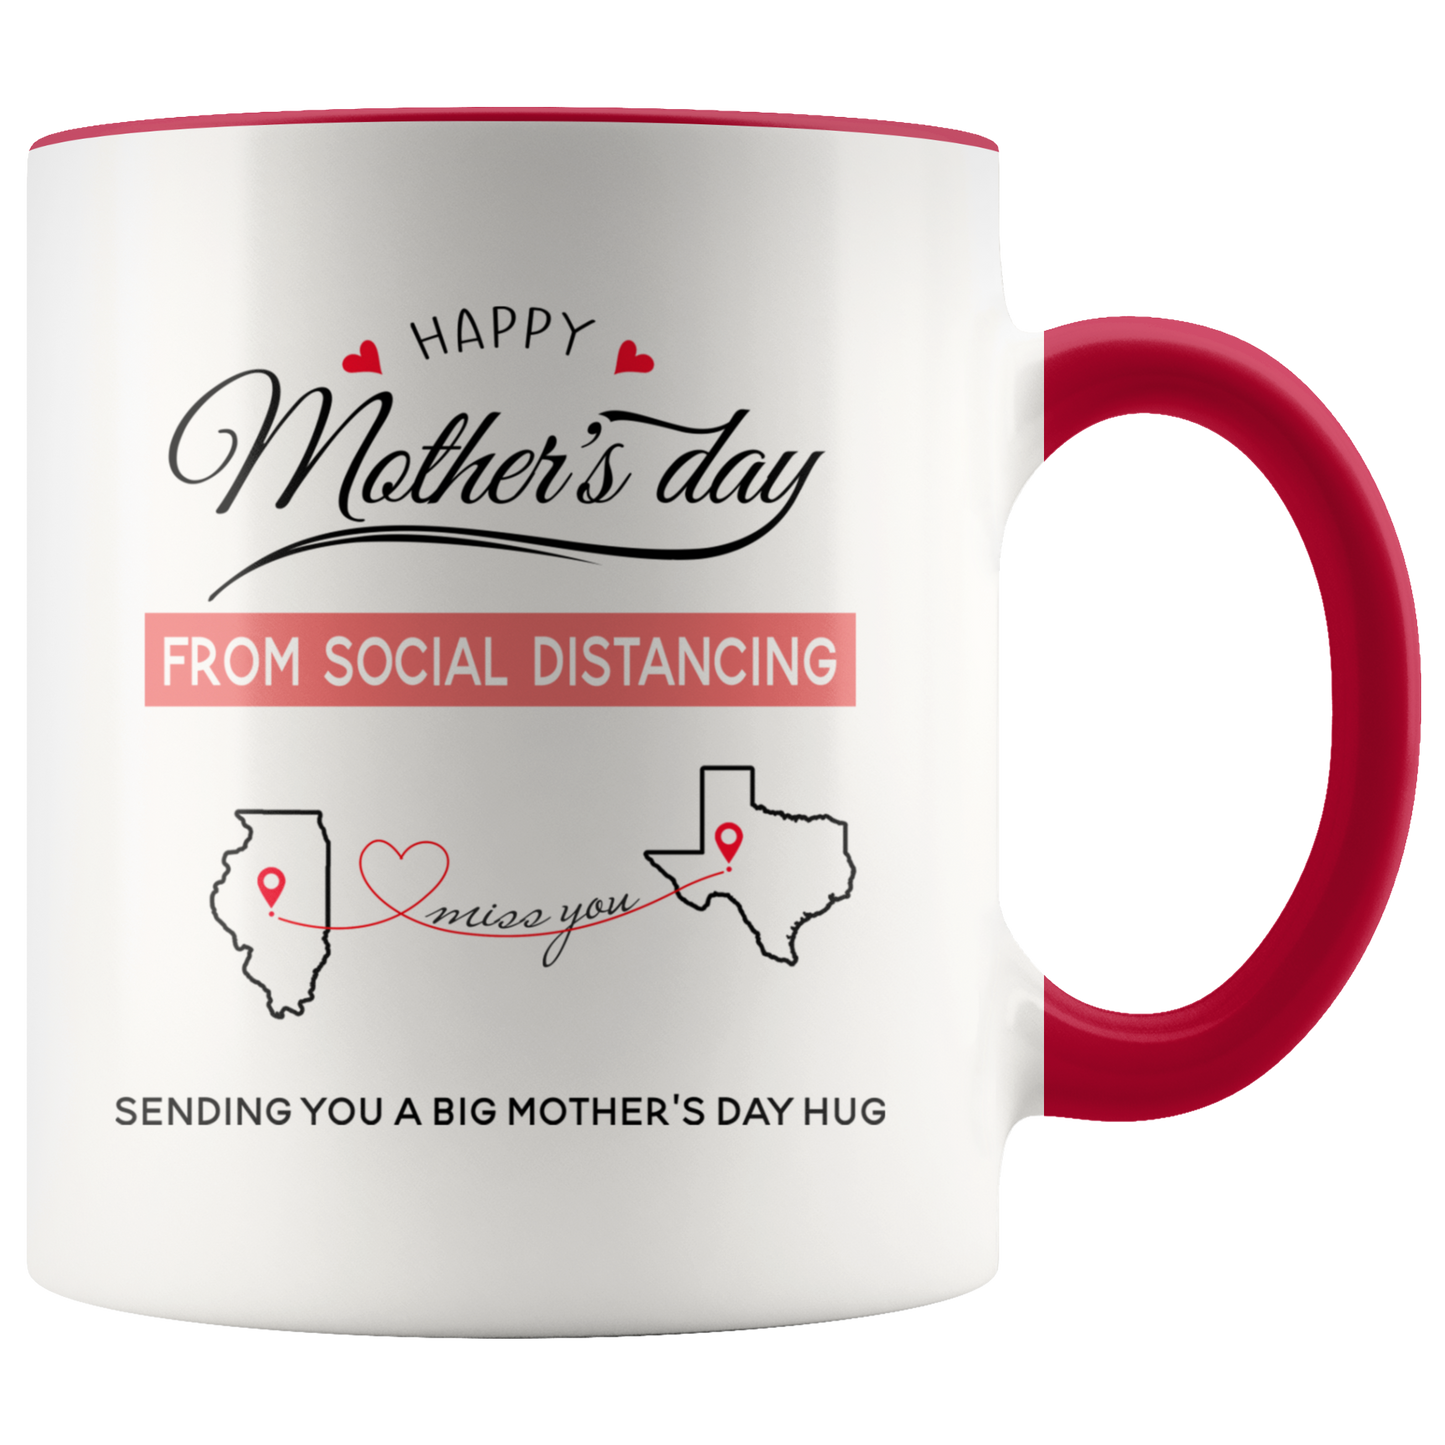 ND-21436247-sp-26603 - [ Illinois | Texas ] (CC_Accent_Mug_) Happy Mothers Day From Social Distancing, Sending You A Big